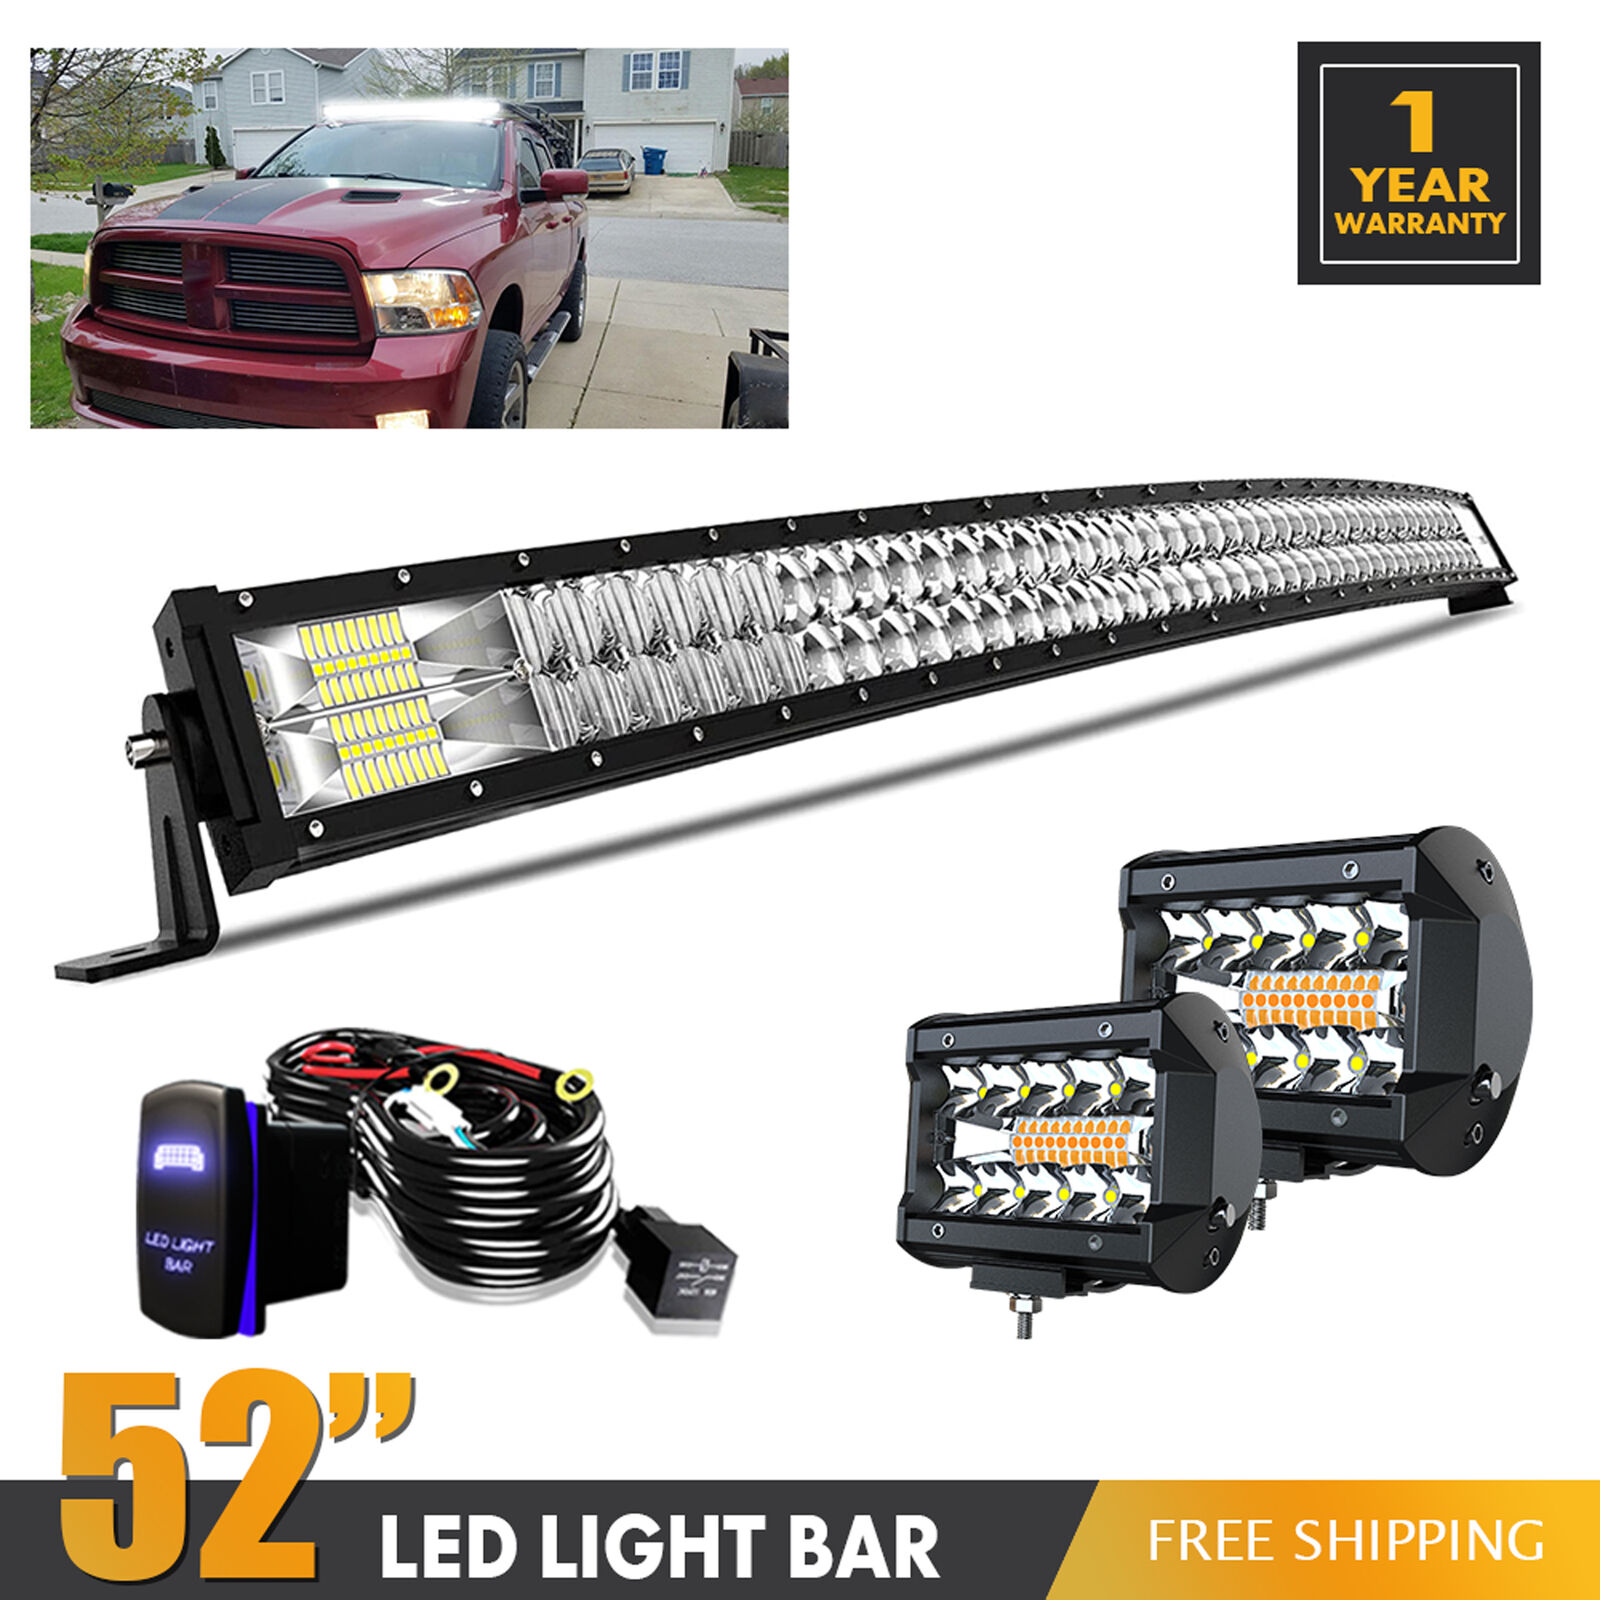 52in 300W Curved LED Light Bar Flood Spot Combo For Driving Truck Offroad Pickup